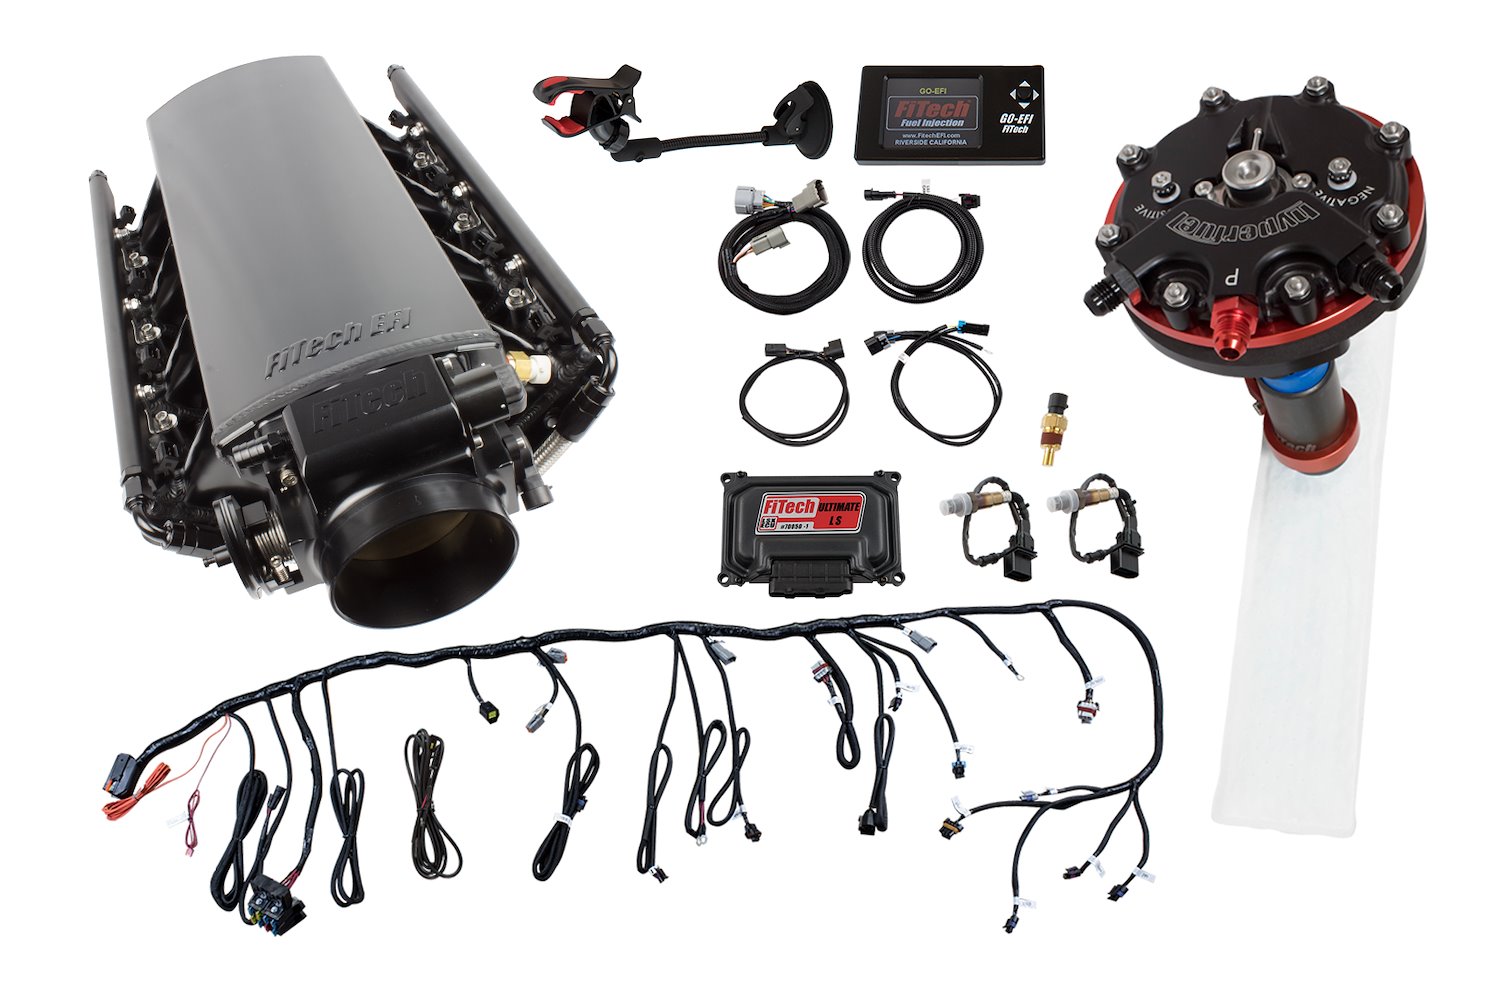 Ultimate LS EFI Fuel Injection System LS3/L92 750 HP with Transmission Control and Hy-Fuel Single Pump Regulated In-Tank Retrofi